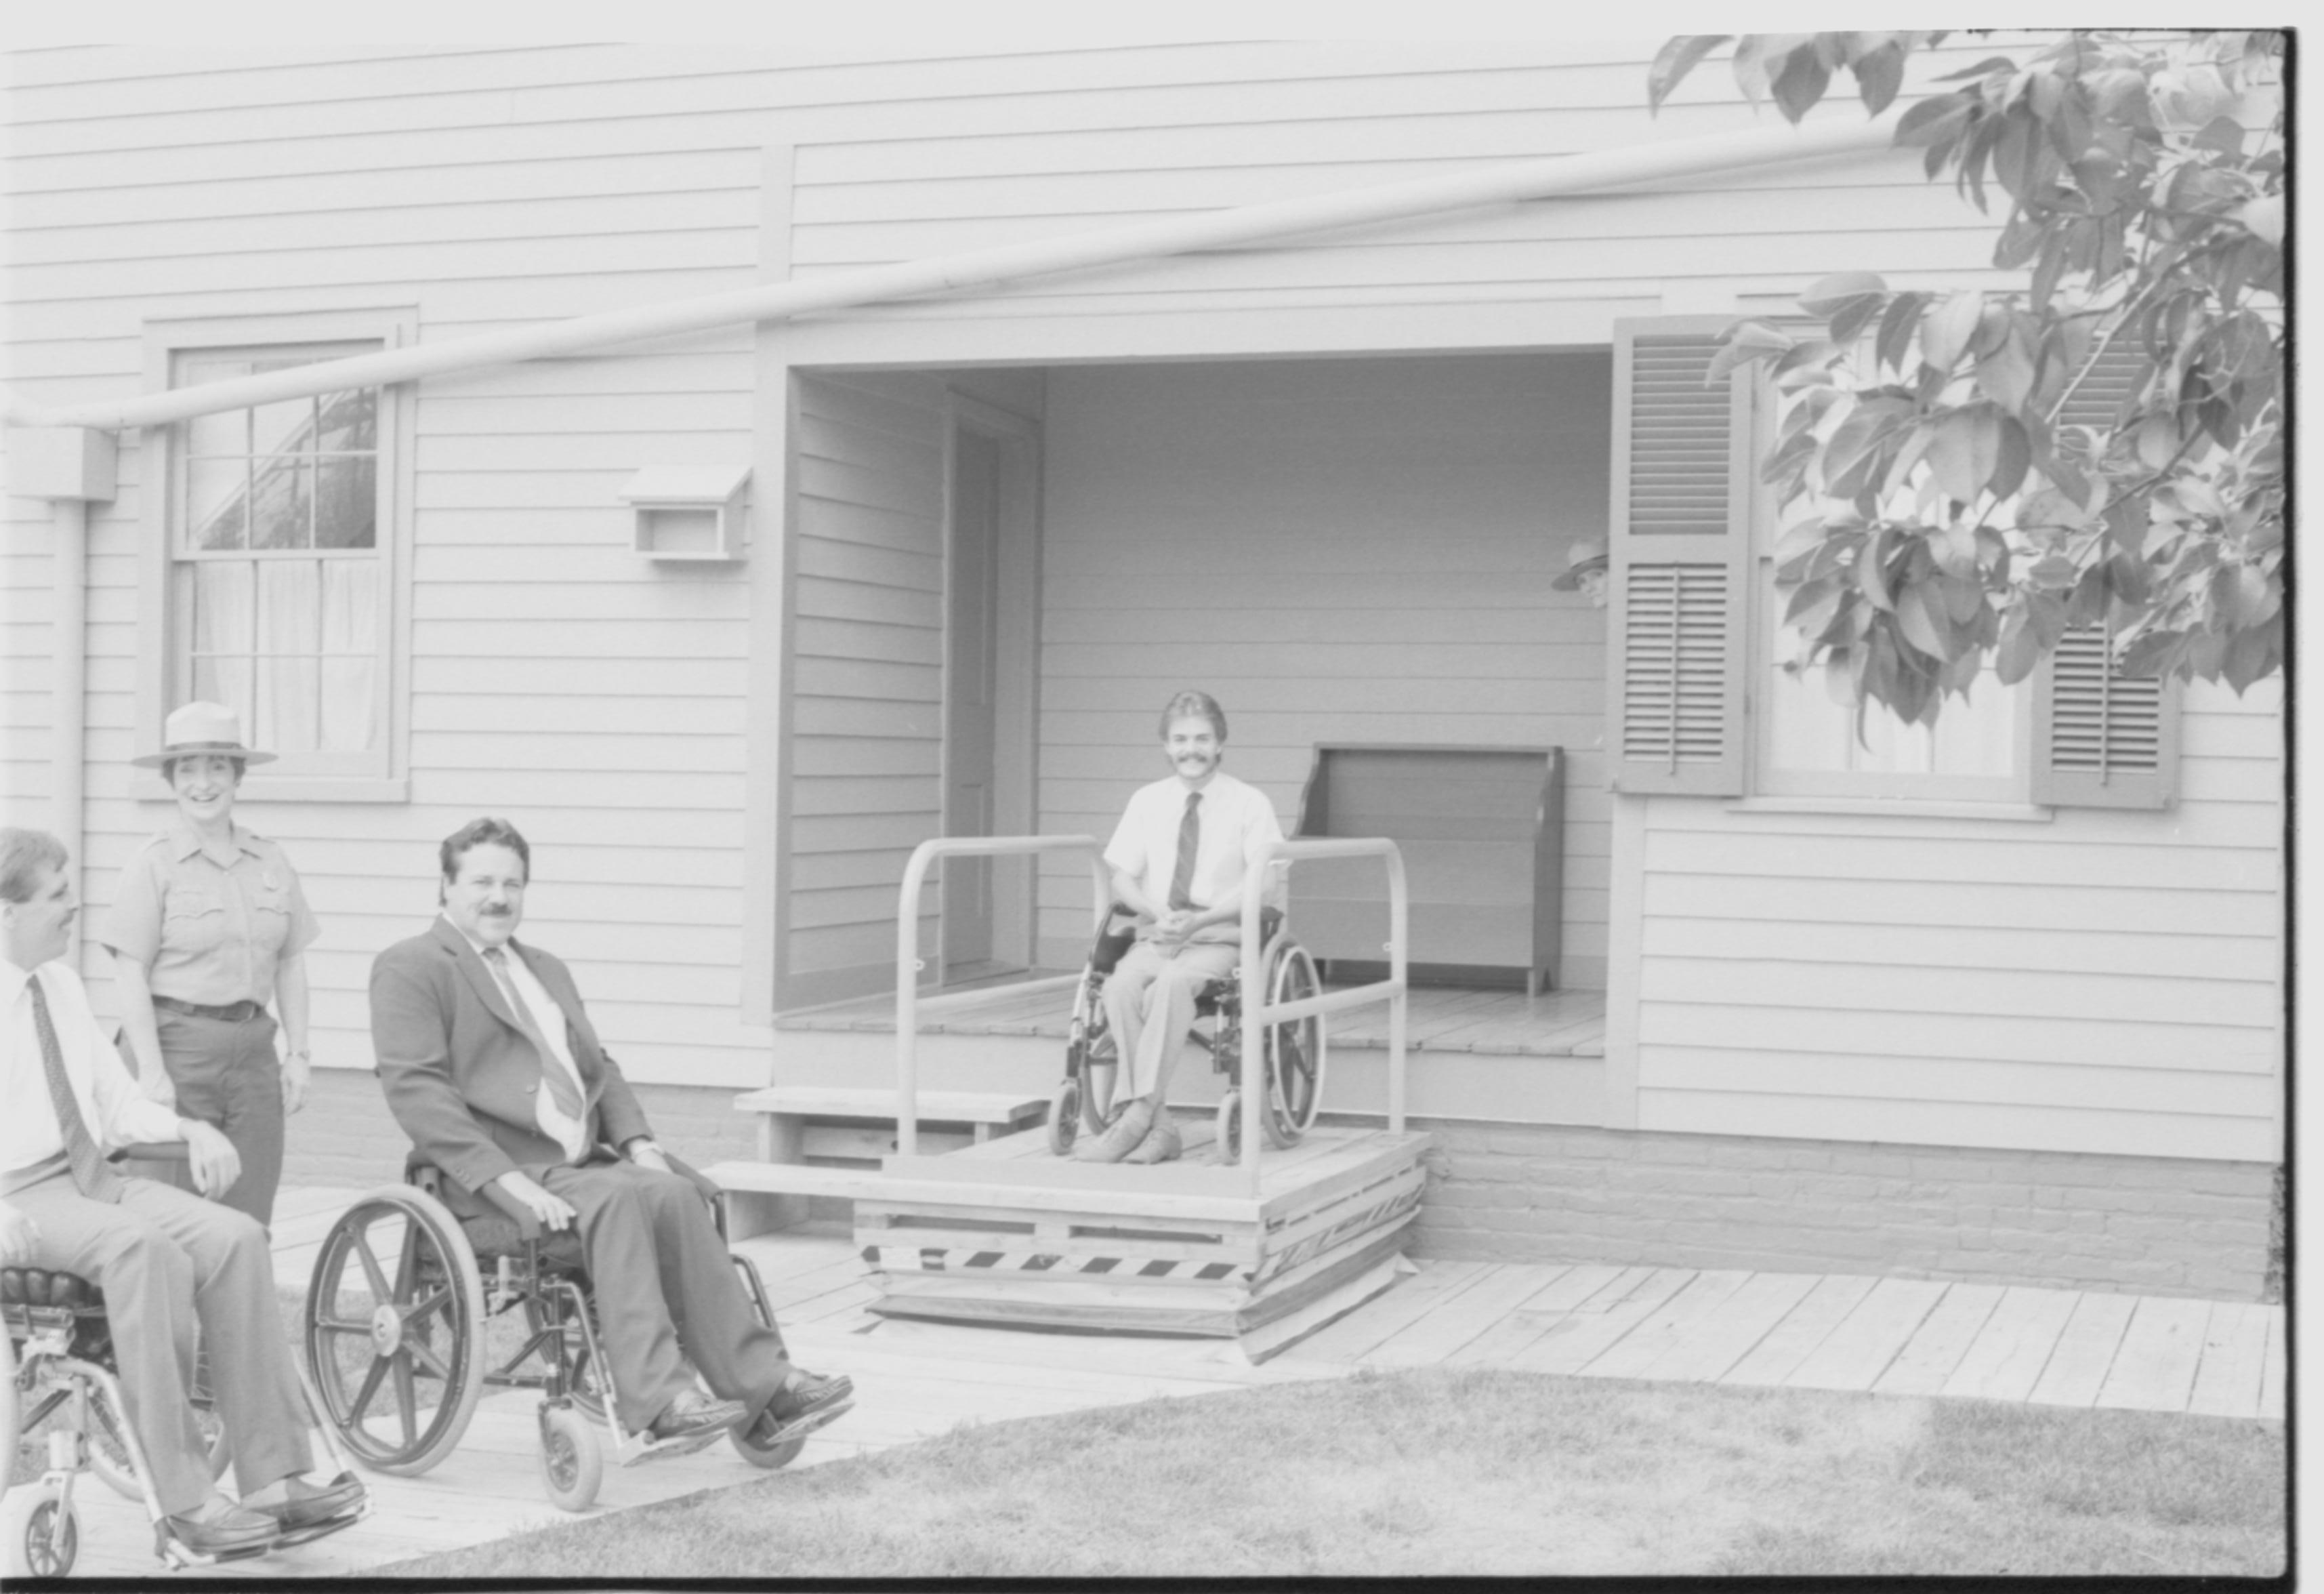 Lincoln Home wheelchair lift, at half height. One man in wheelchair on lift, facing away from Lincoln Home, with two other men in wheelchairs at ground level. Staff member Judith Winkelmann stands behind men in wheelchairs at ground level. Photographer facing south west.